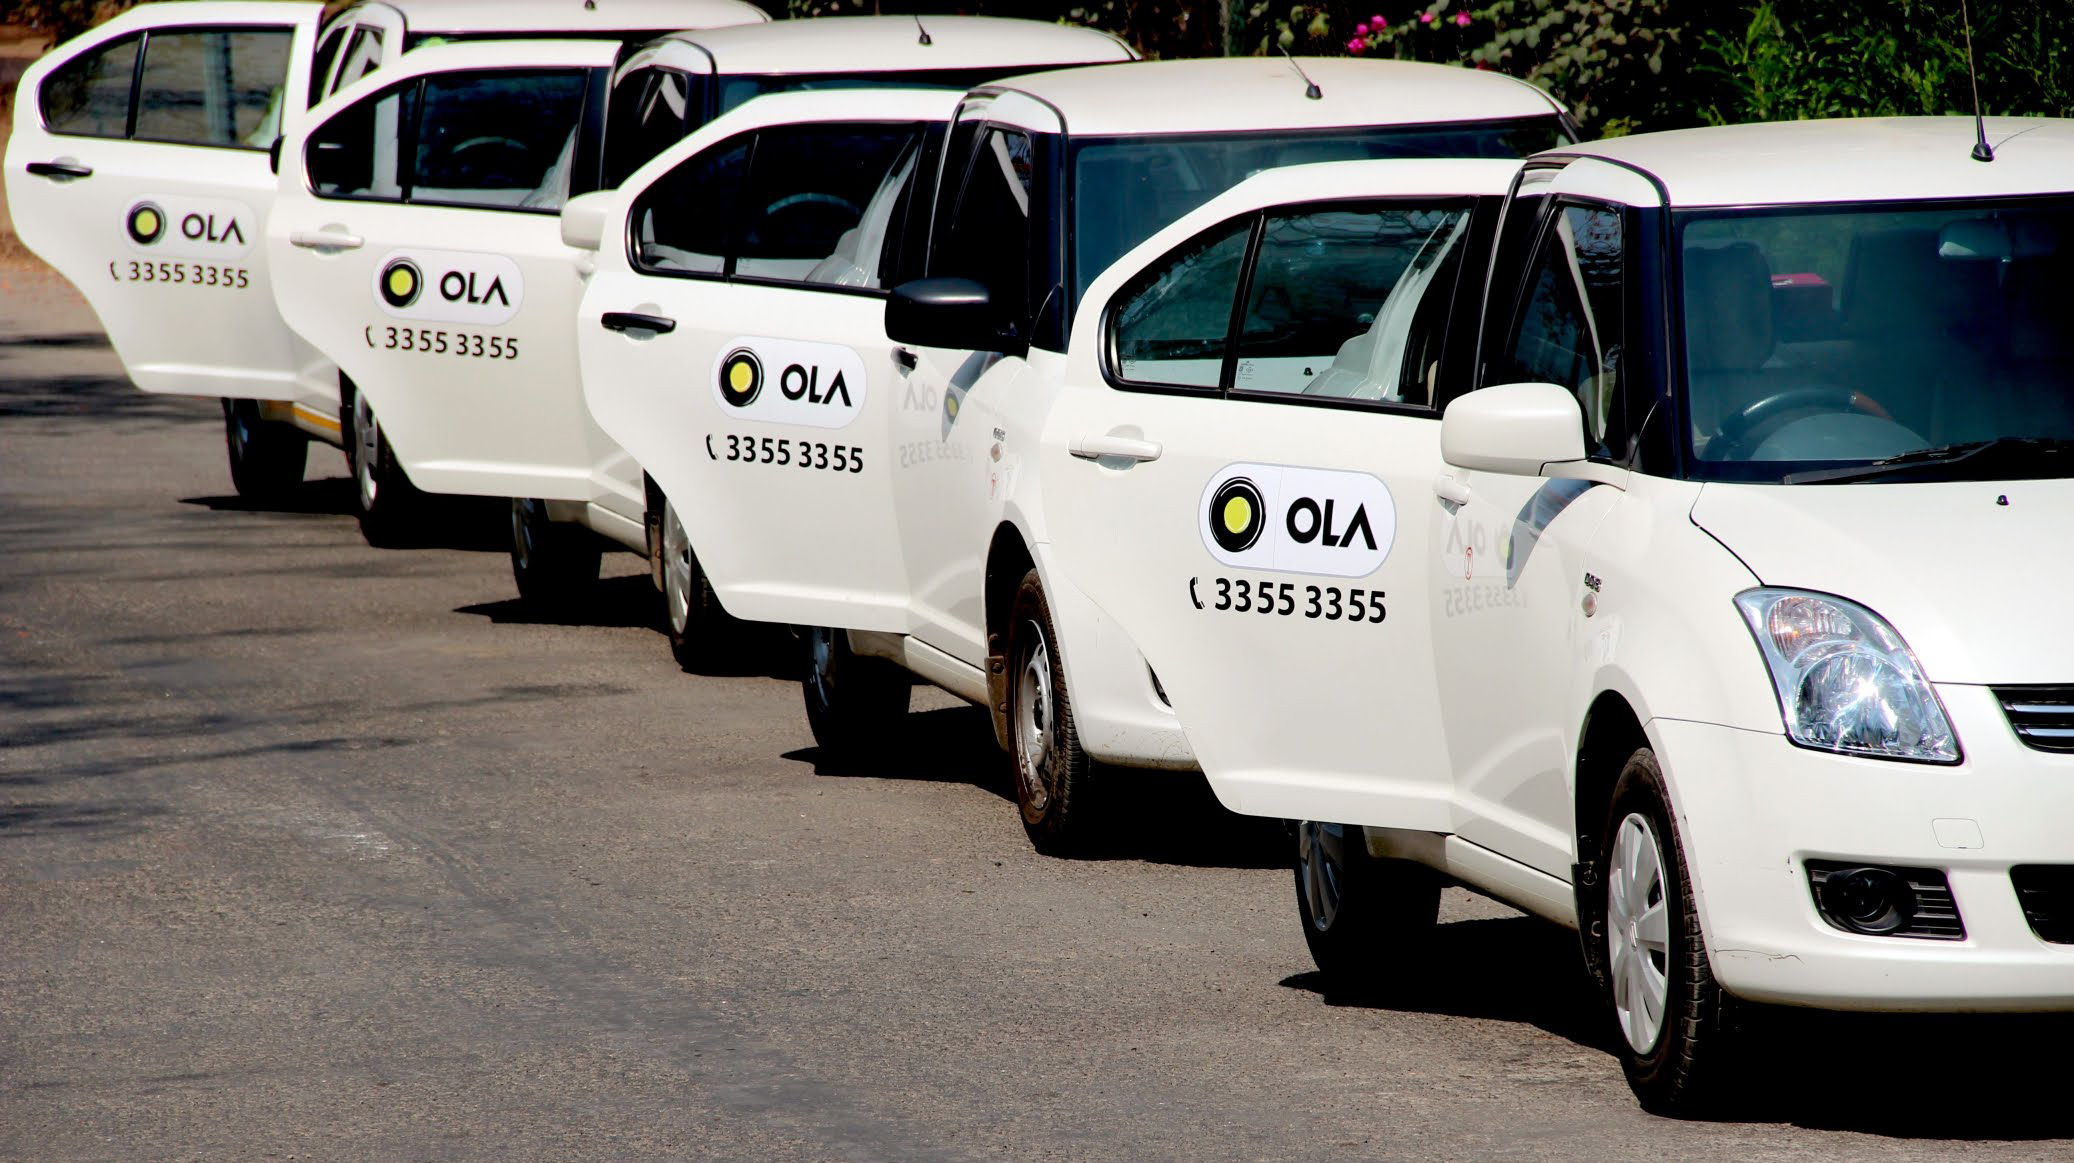 Ola Cabs,R S Puram Coimbatore - Cab and Taxi Services in Coimbatore